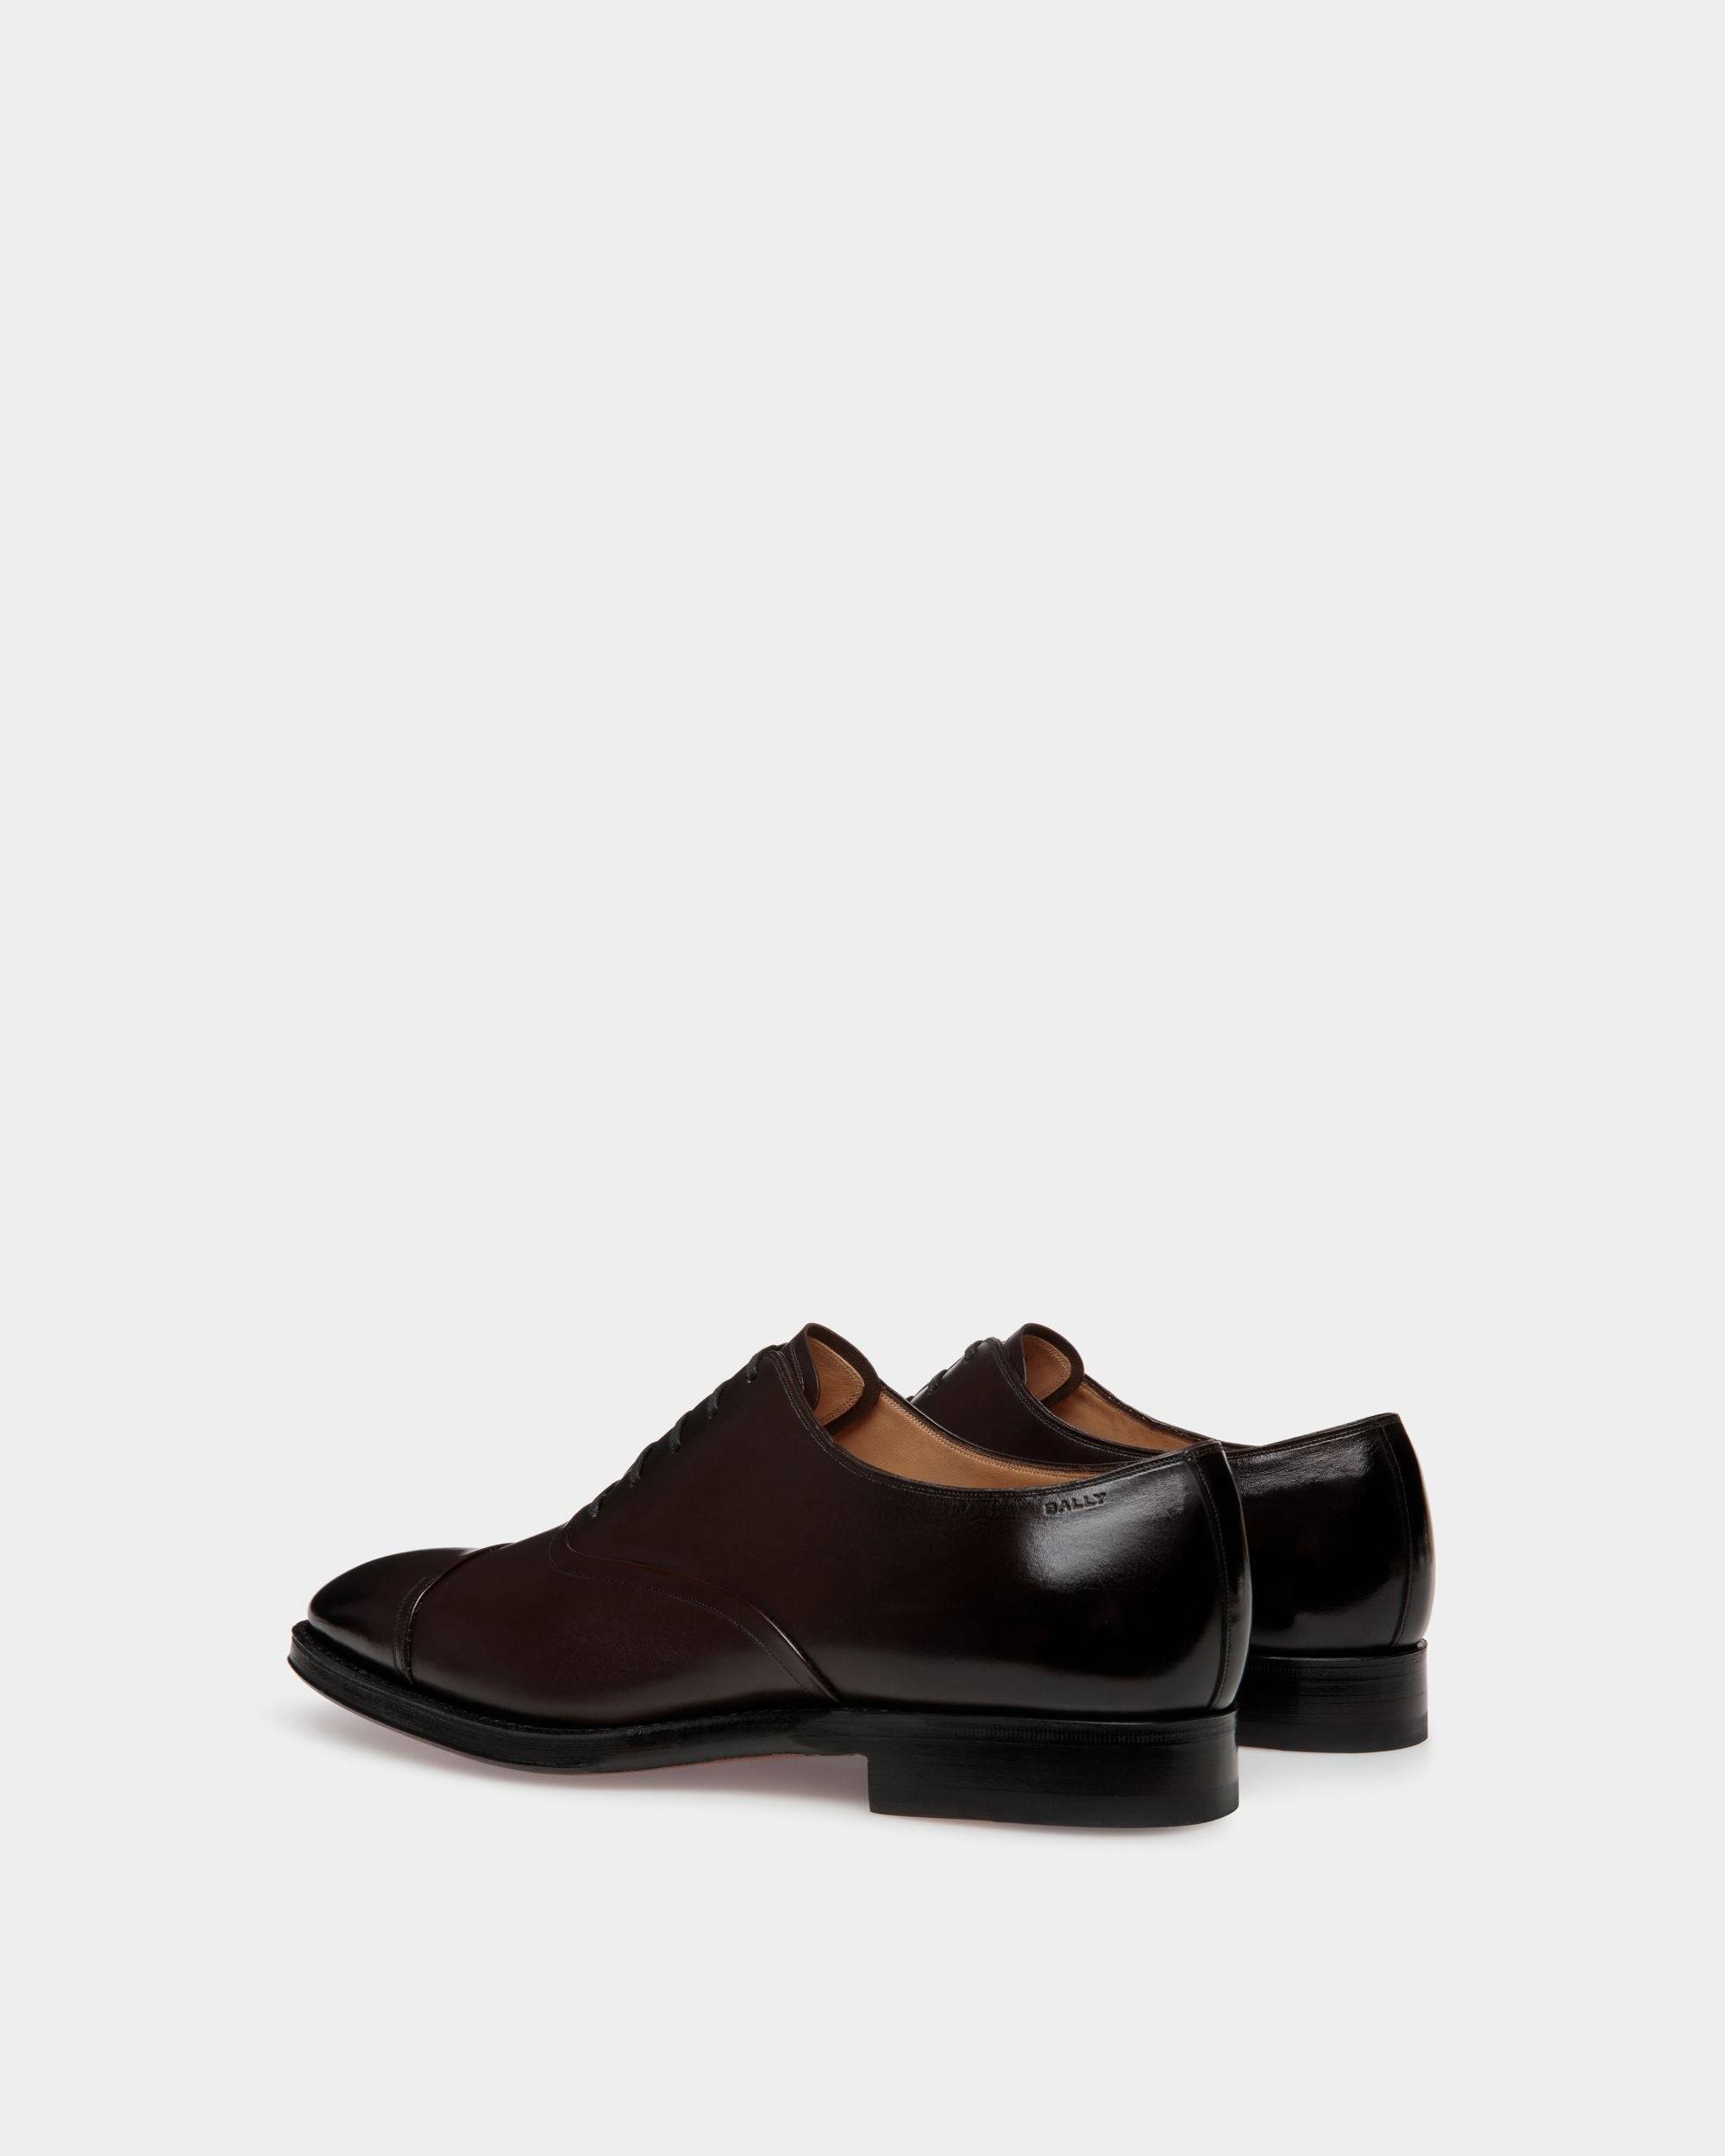 Selby | Men's Oxford Shoes | Brown Leather | Bally | Still Life 3/4 Back